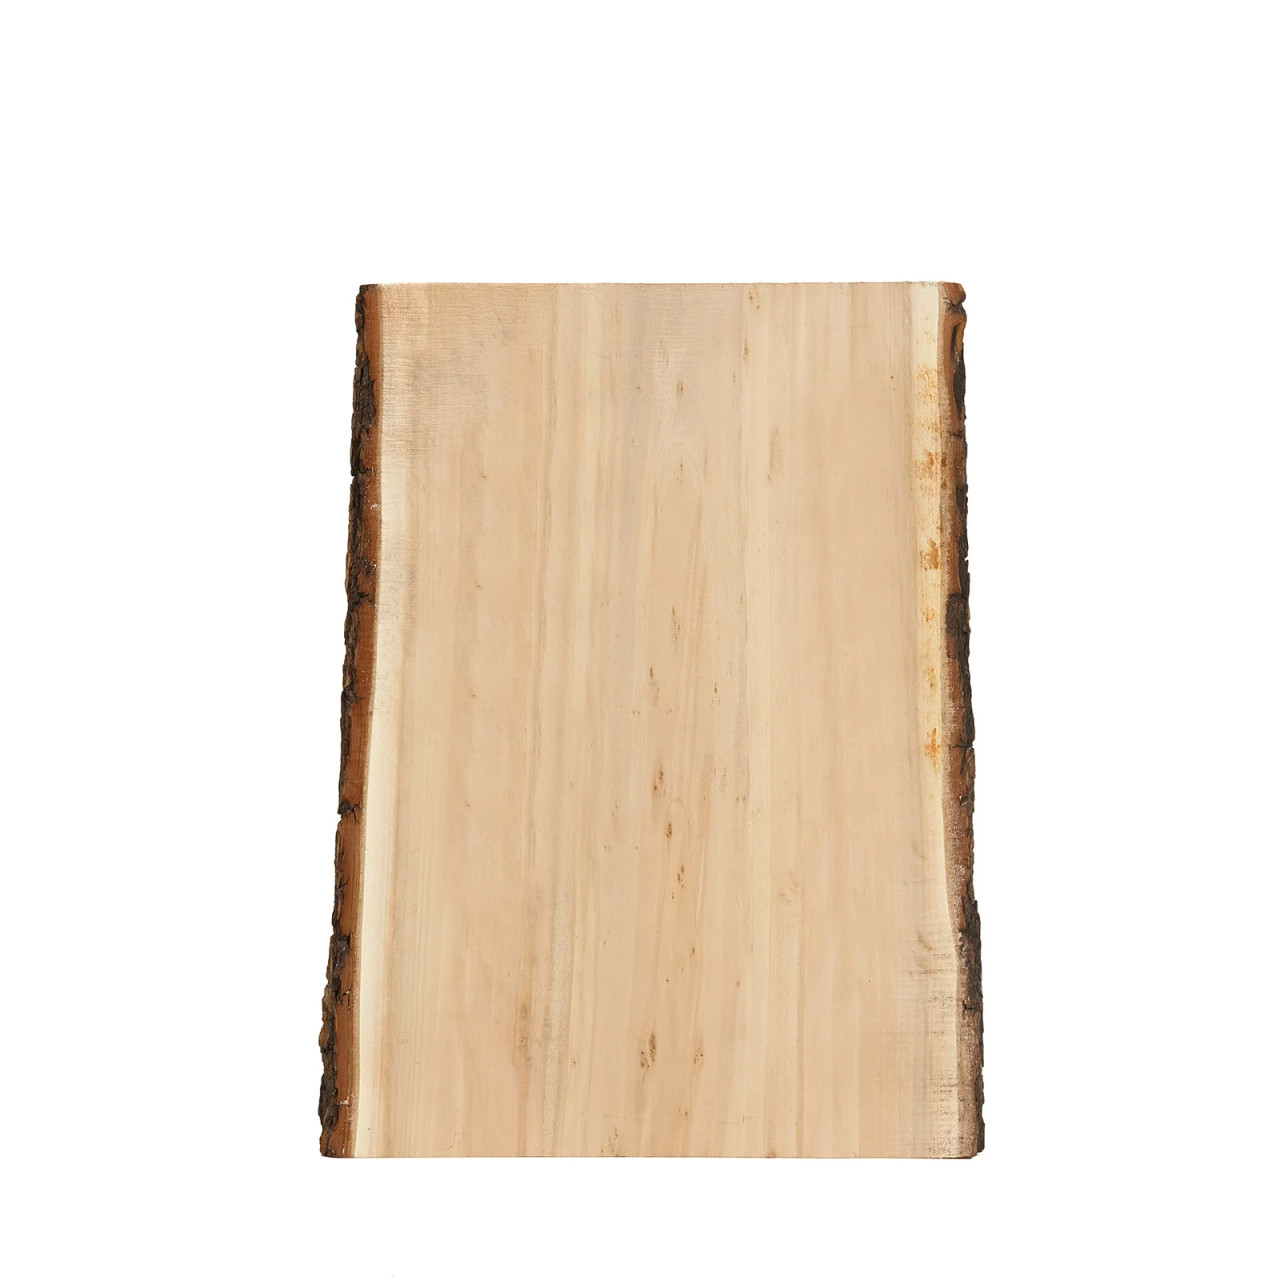 Primitive wood thick cutting board. Measures 12 by 13 and 1 1/2